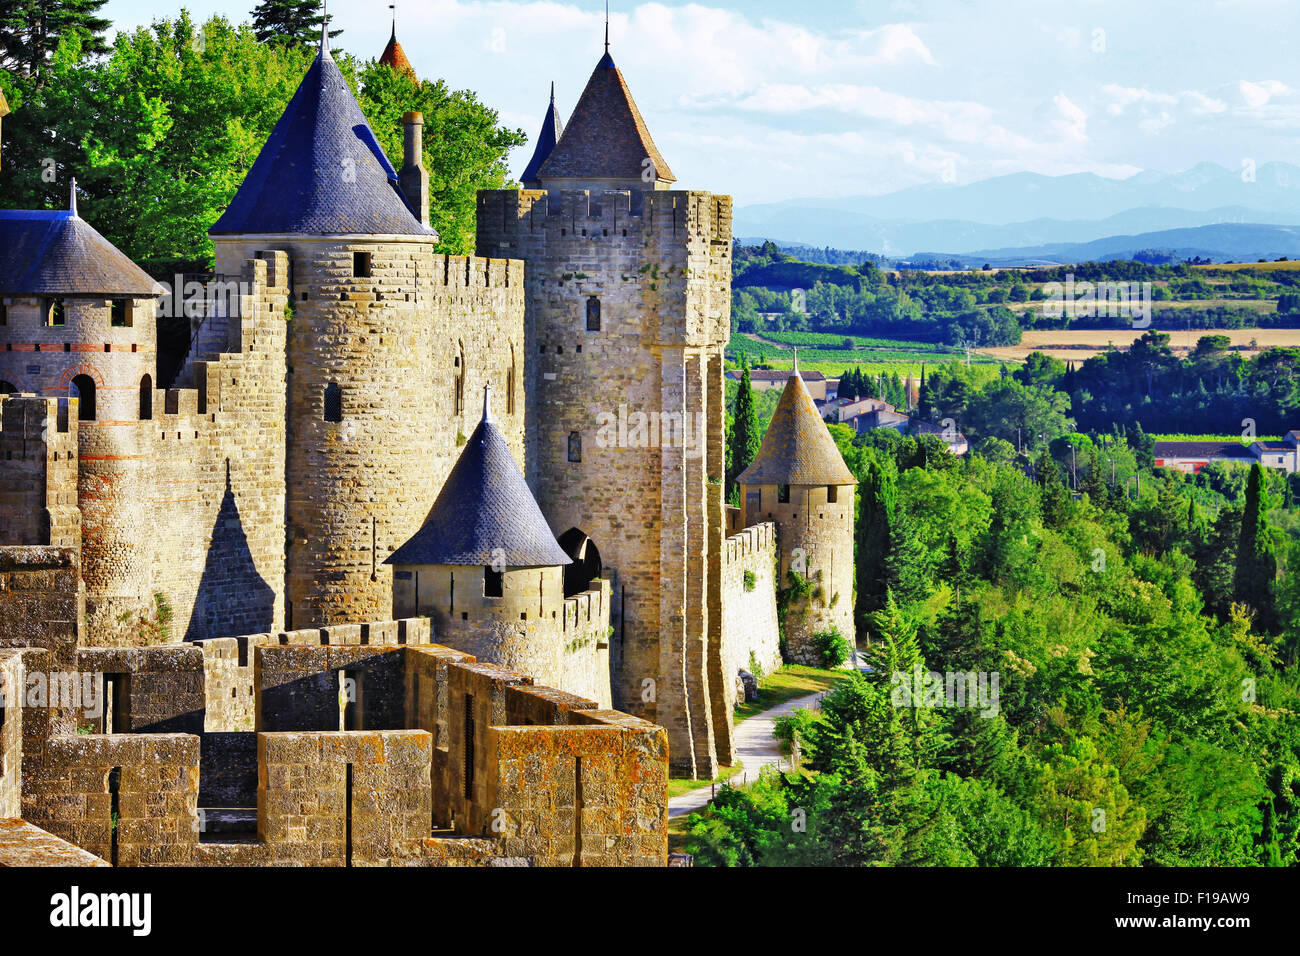 Carcassonne - medieval castle-fortress in France, popular touristic attraction Stock Photo